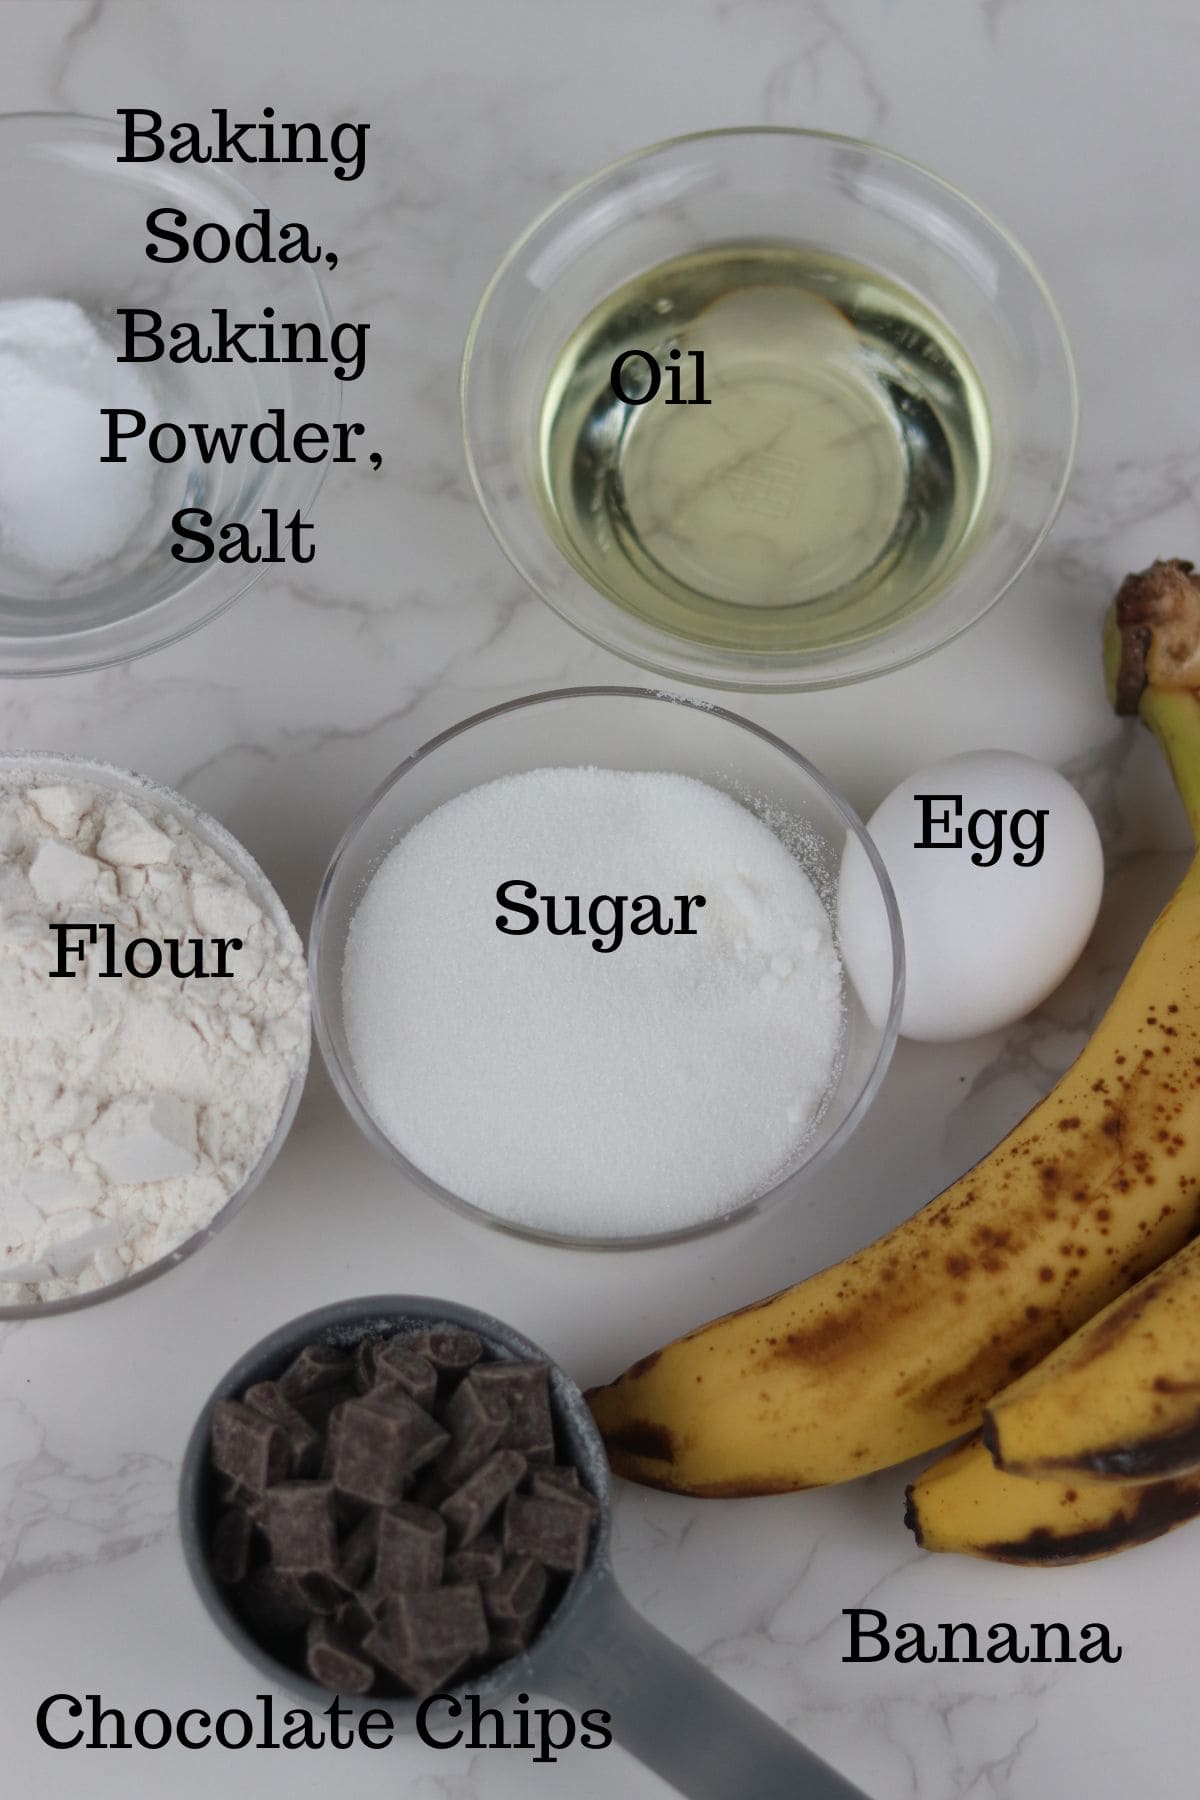 ingredients needed to make banana muffins